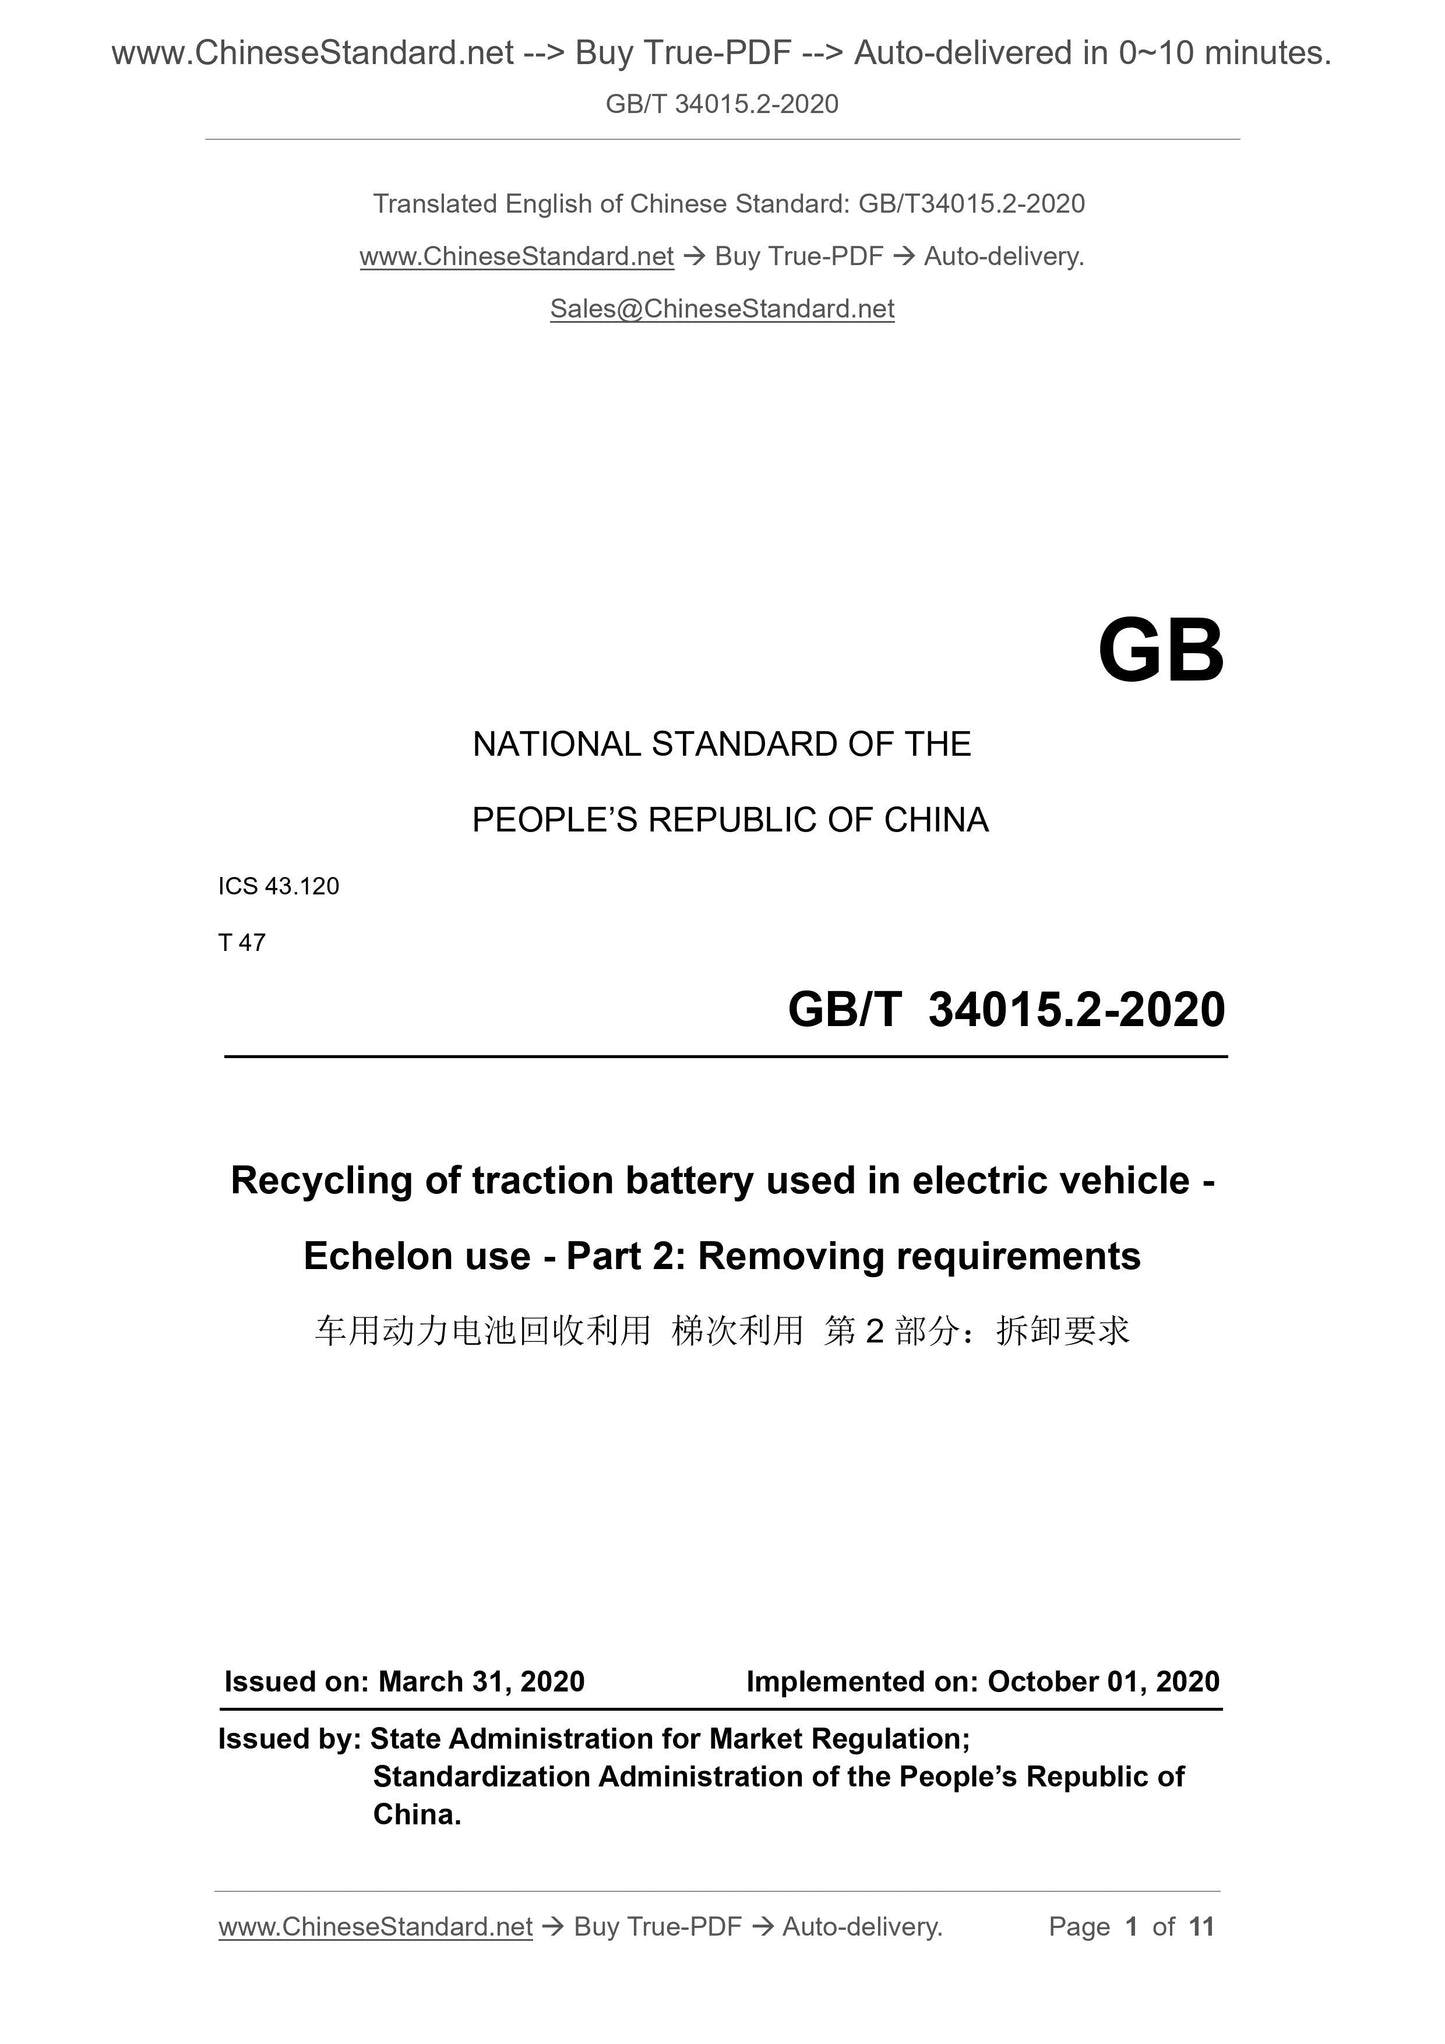 GB/T 34015.2-2020 Page 1